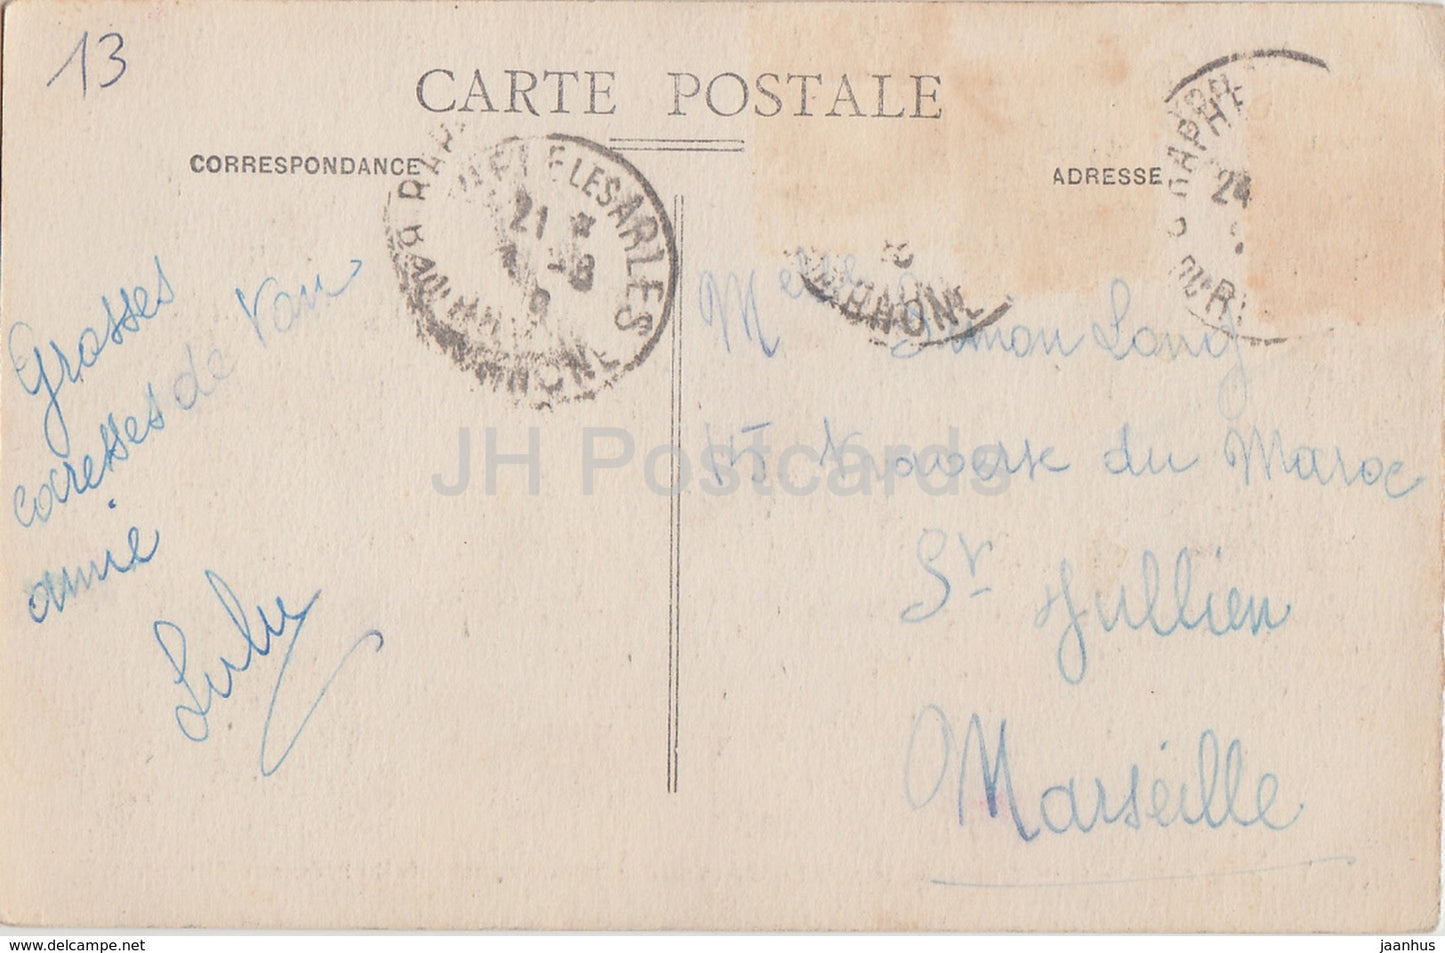 Arles - Facade de la Cathedrale St Trophime - cathedral - 91 - old postcard - France - used